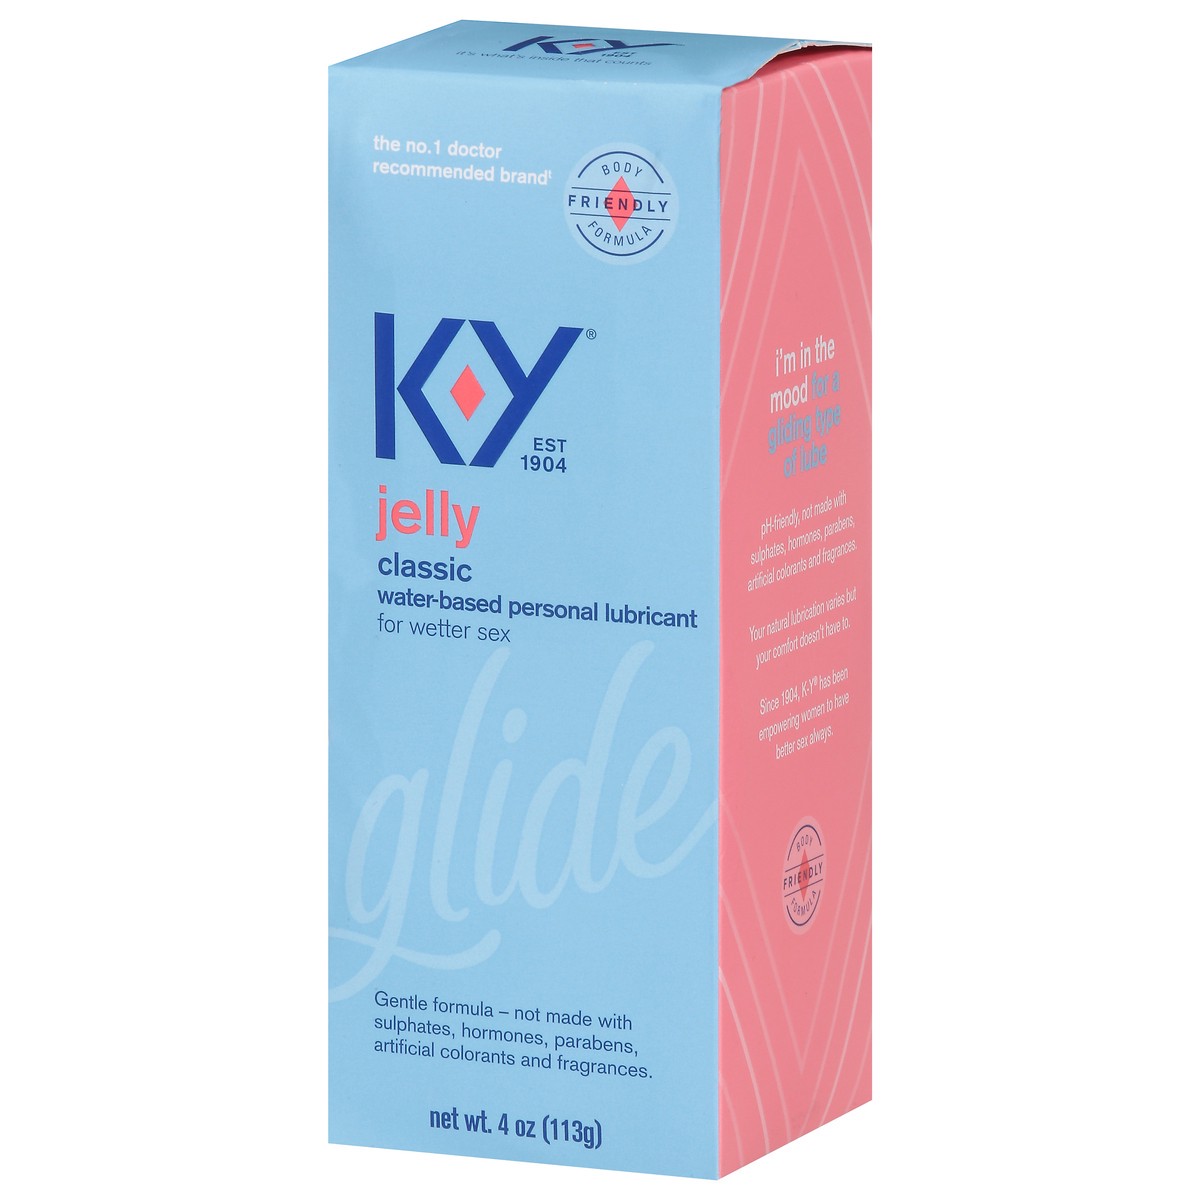 slide 6 of 13, K-Y Jelly Personal Lubricant, Body-Friendly Water-Based Formula, Safe for Anal Sex, Safe to Use with Latex Condoms. Glide into a Wetter, Better Experience Every Day. For Men, Women, Couples, 4 FL OZ, 4 oz